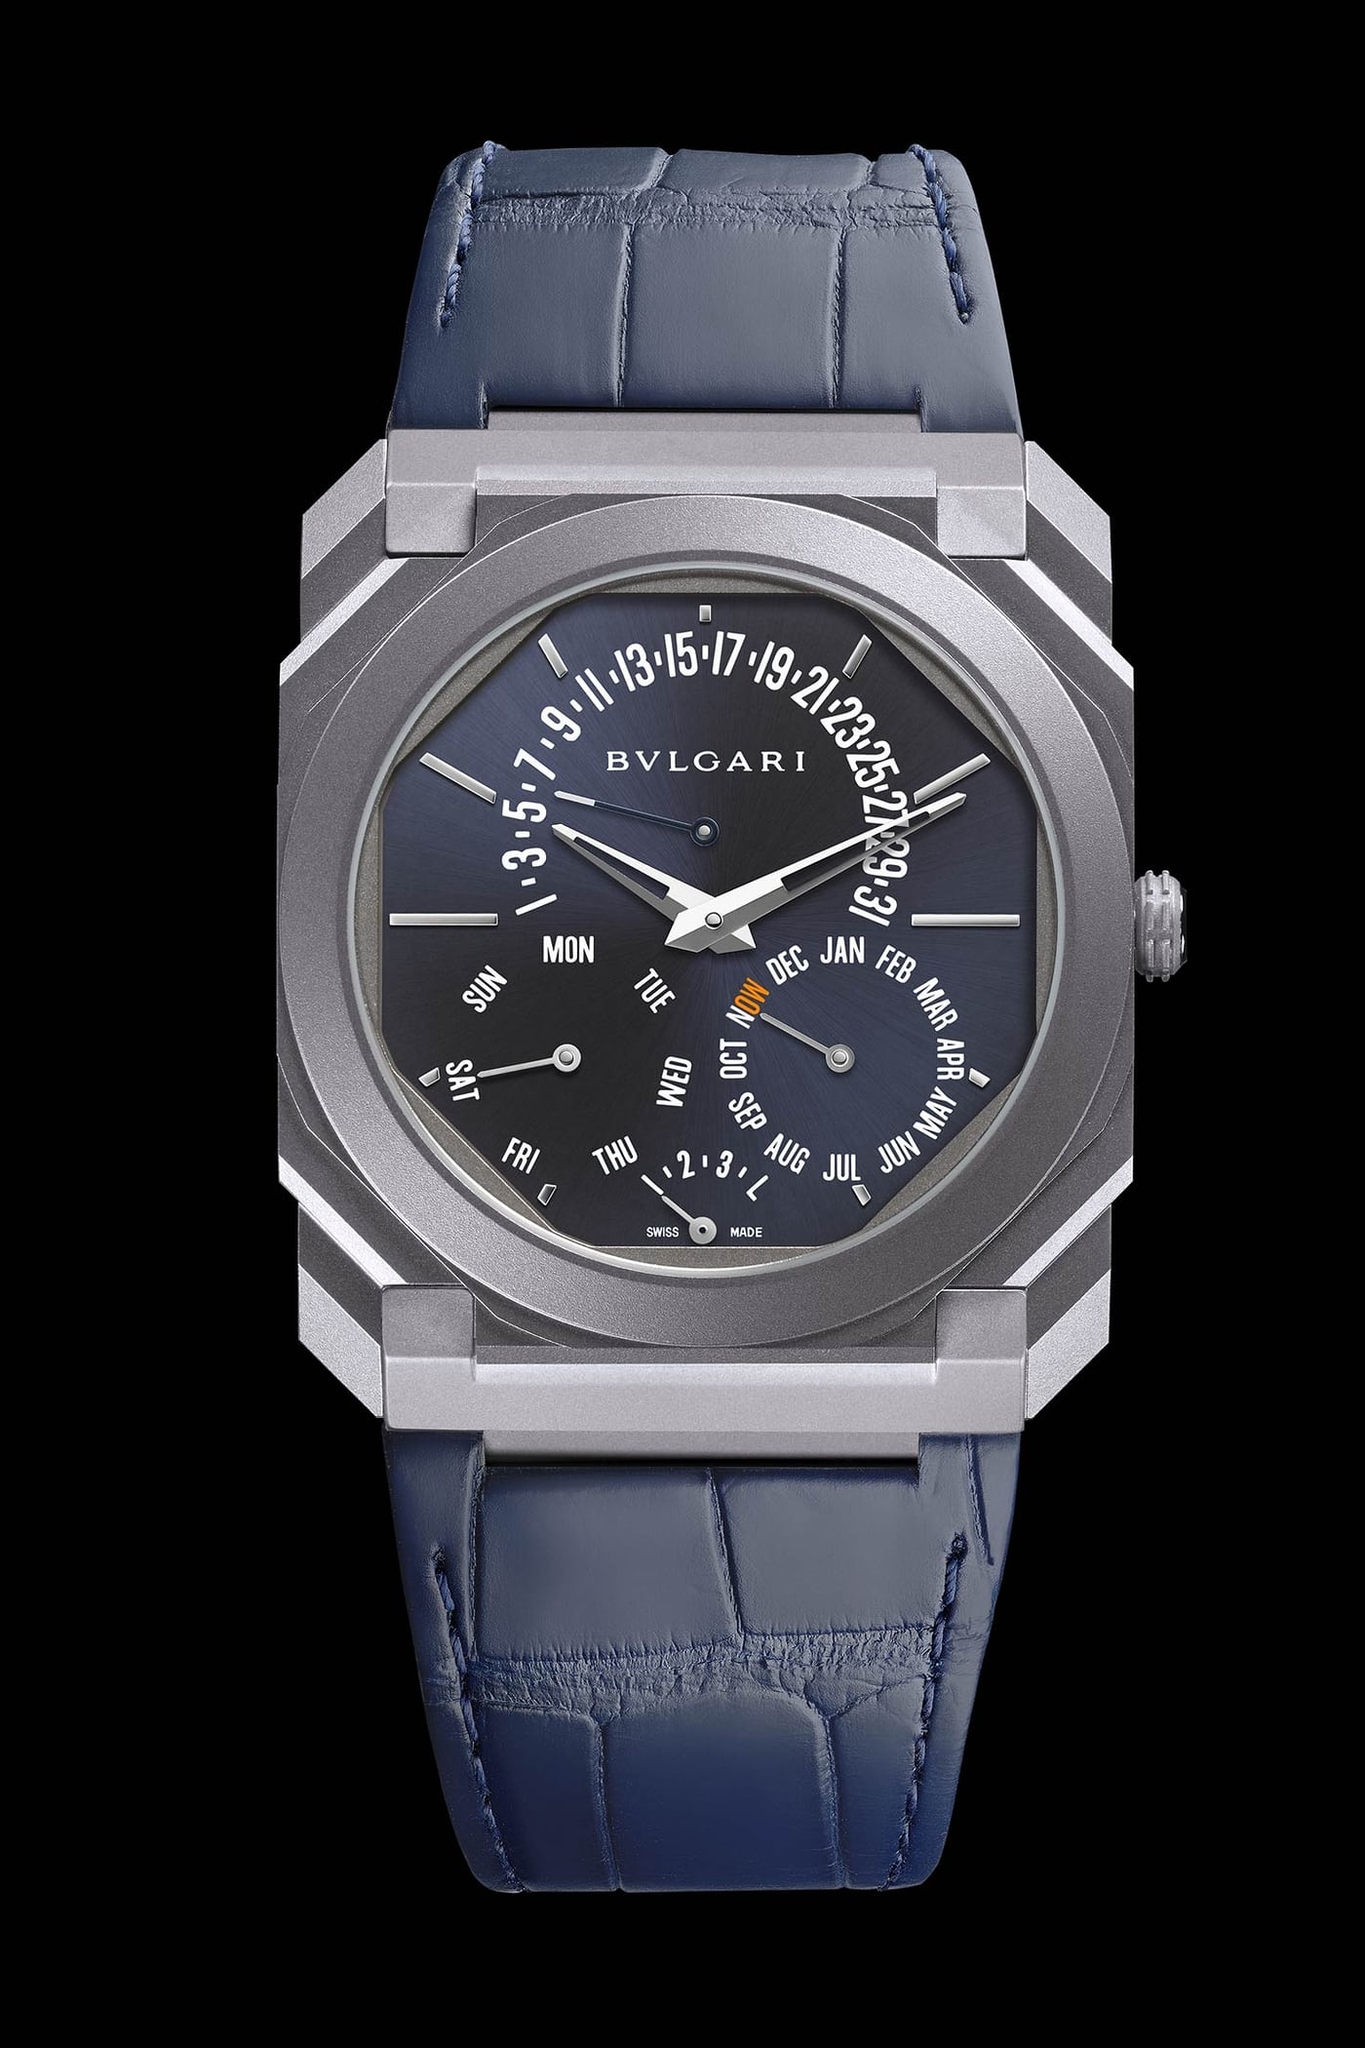 Đồng hồ Bvlgari Octo Finissimo Perpetual Calendar Only Watch 2021